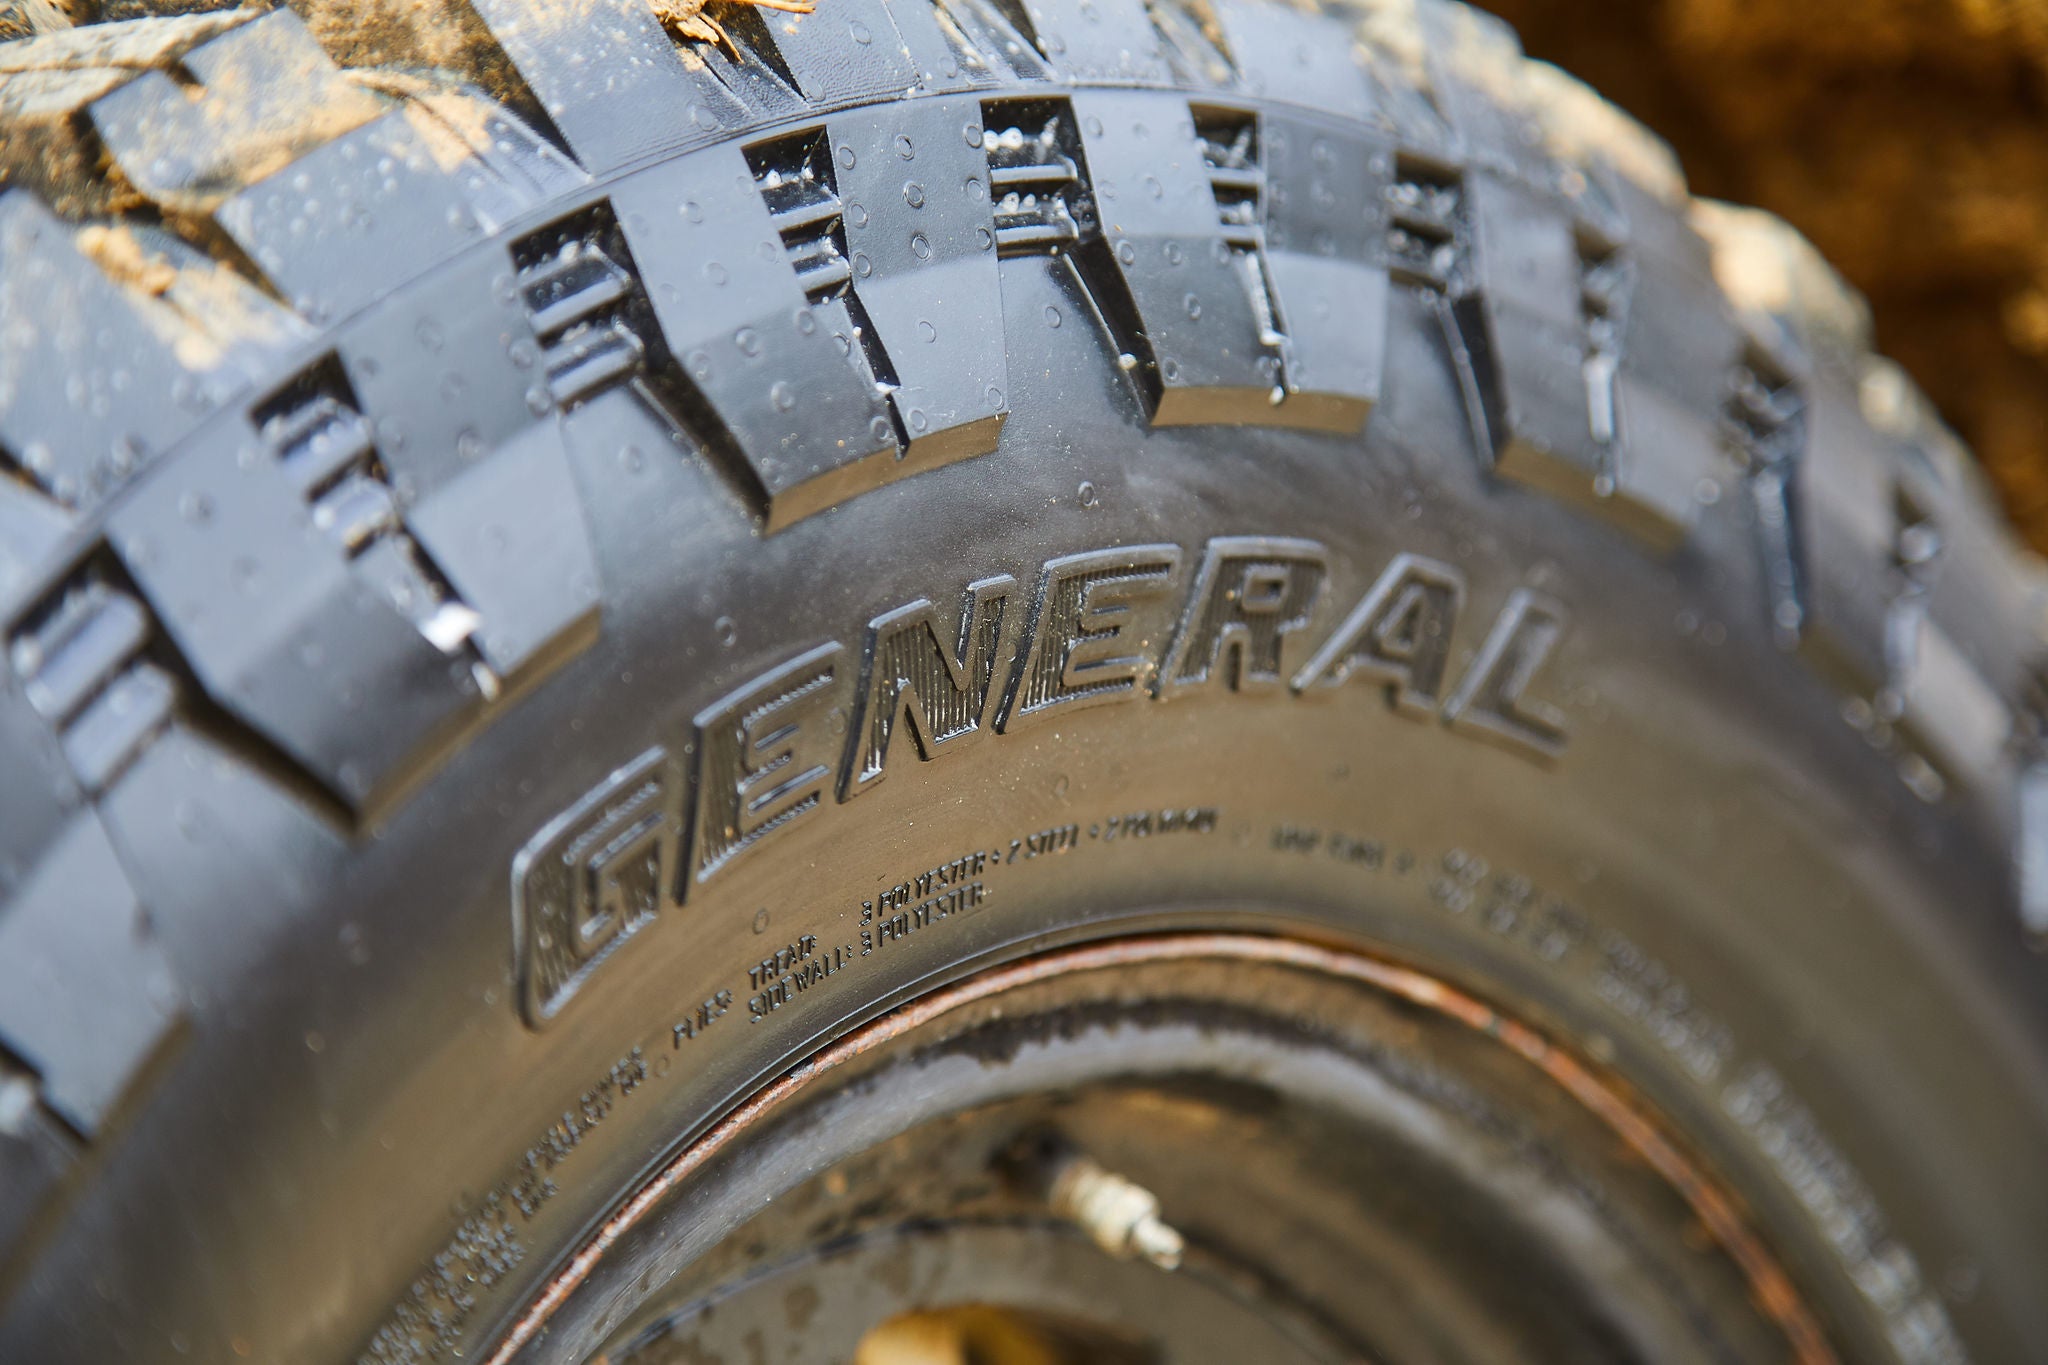 What should my tyre pressure be while off-roading? 